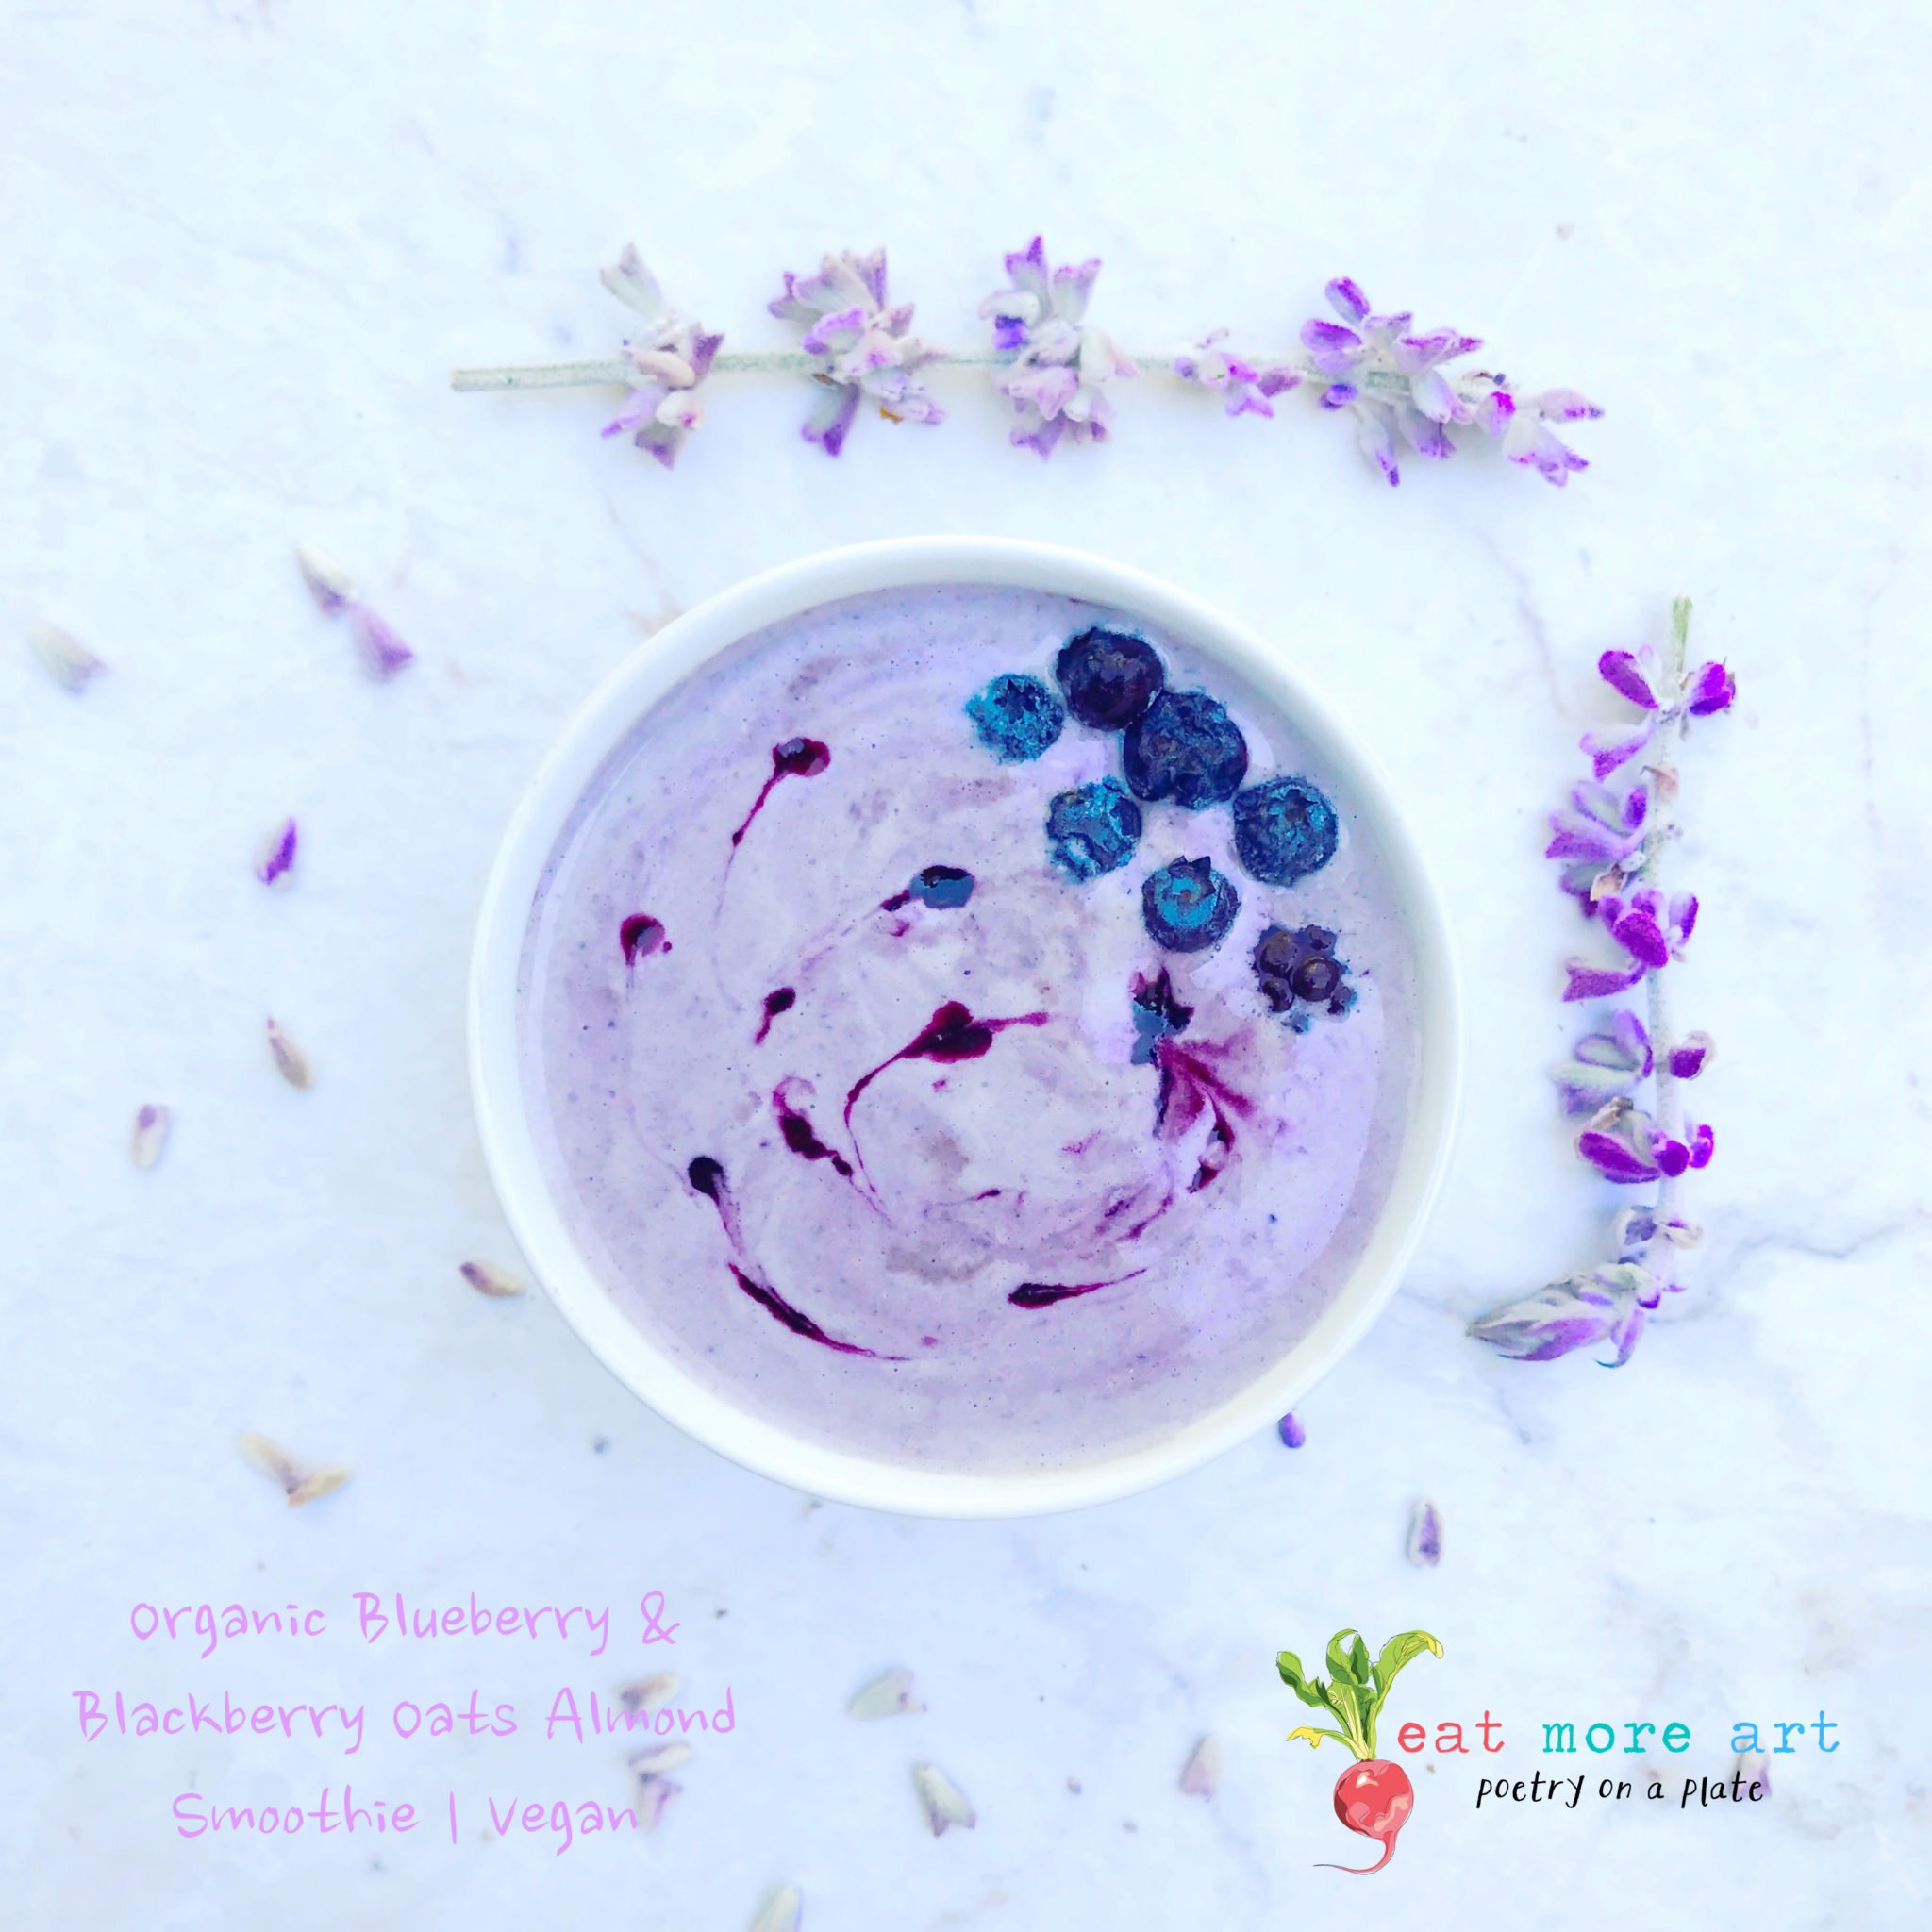 Organic Blueberry & Blackberry, Oats and Almond Smoothie | Vegan | Eat More Art